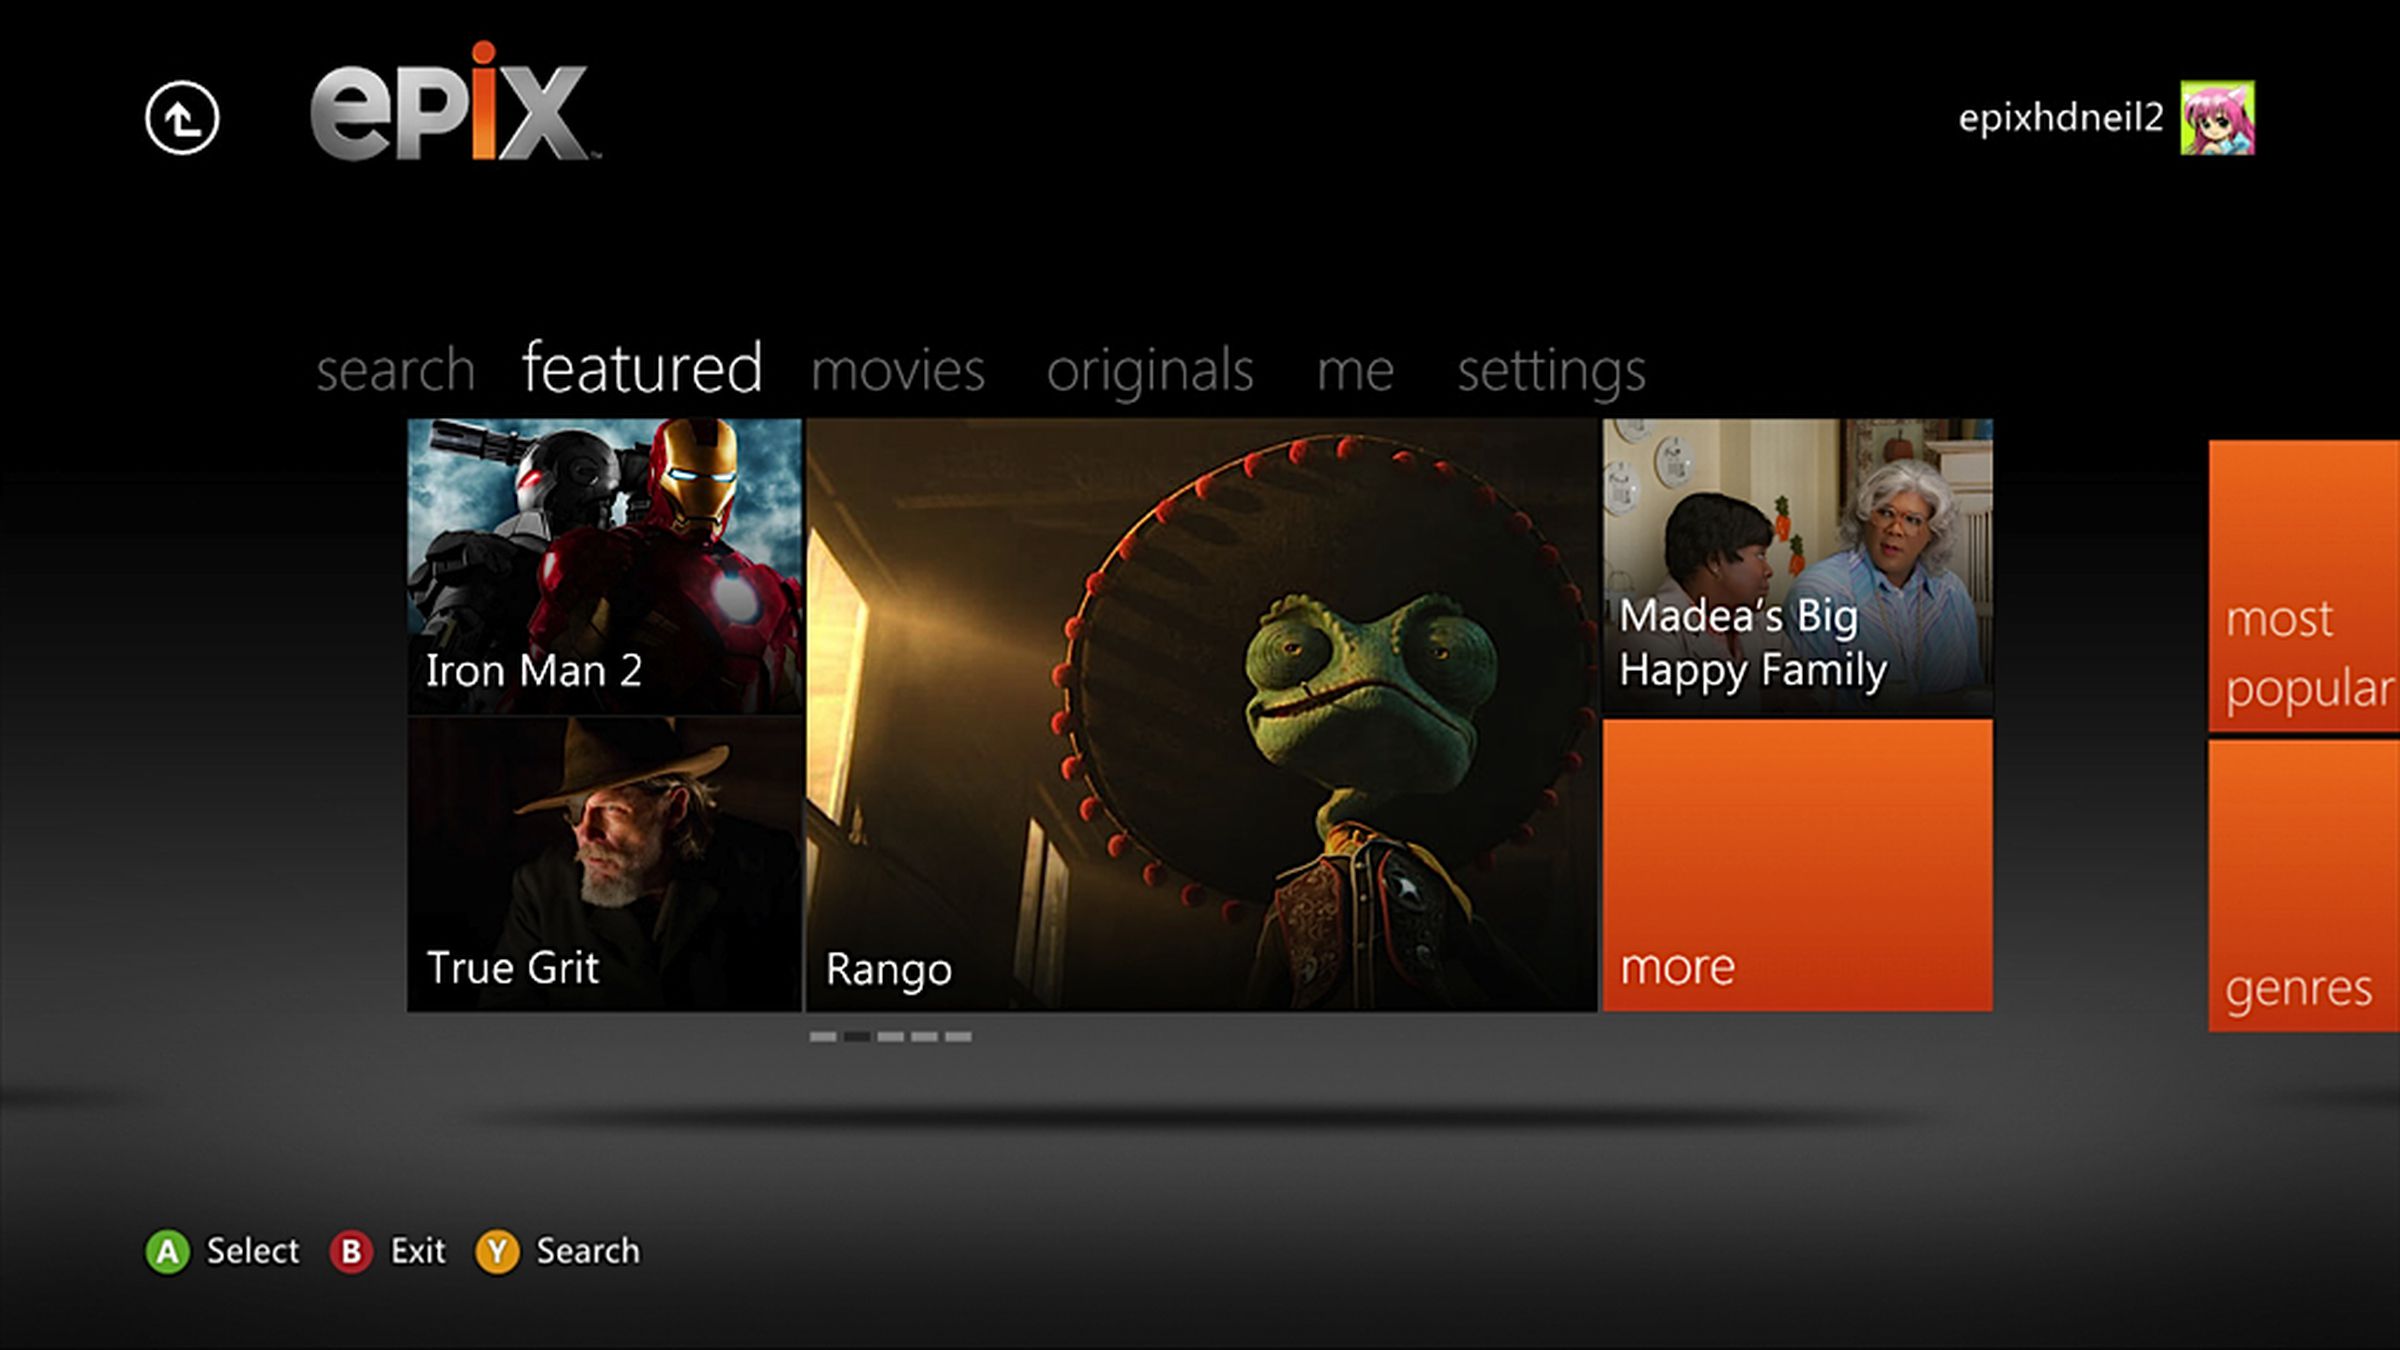 Xbox Live 2011-2012 content partners: YouTube, SyFy, a new Netflix, and more!